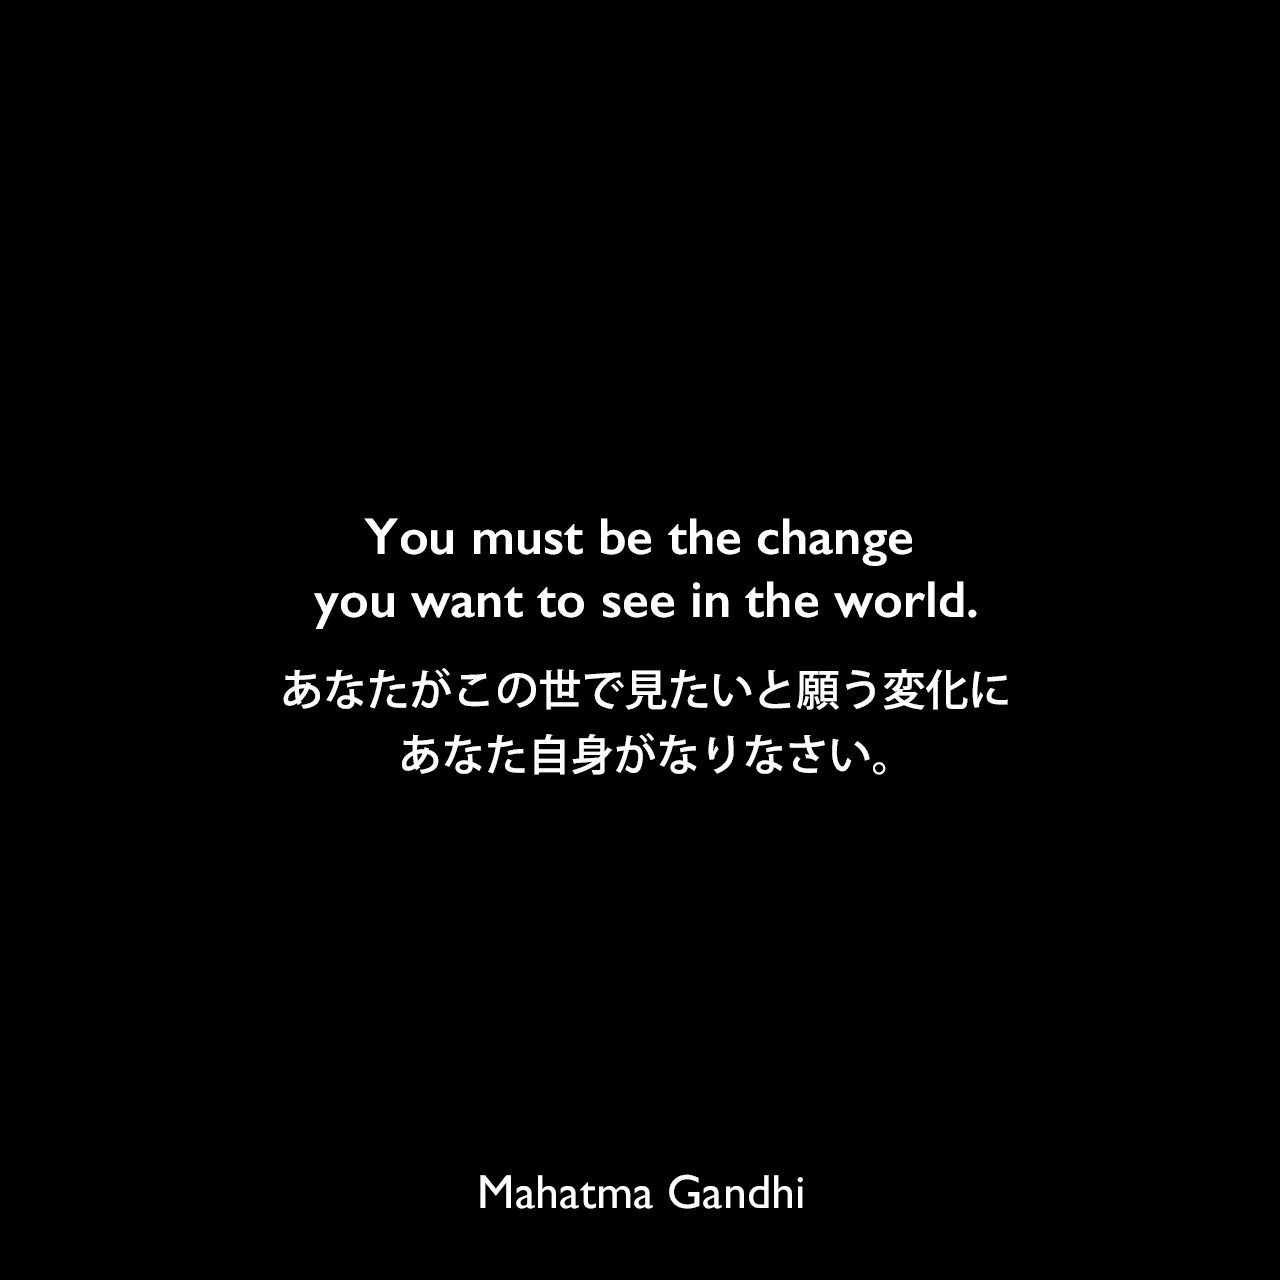 You must be the change you want to see in the world.あなたがこの世で見たいと願う変化に、あなた自身がなりなさい。